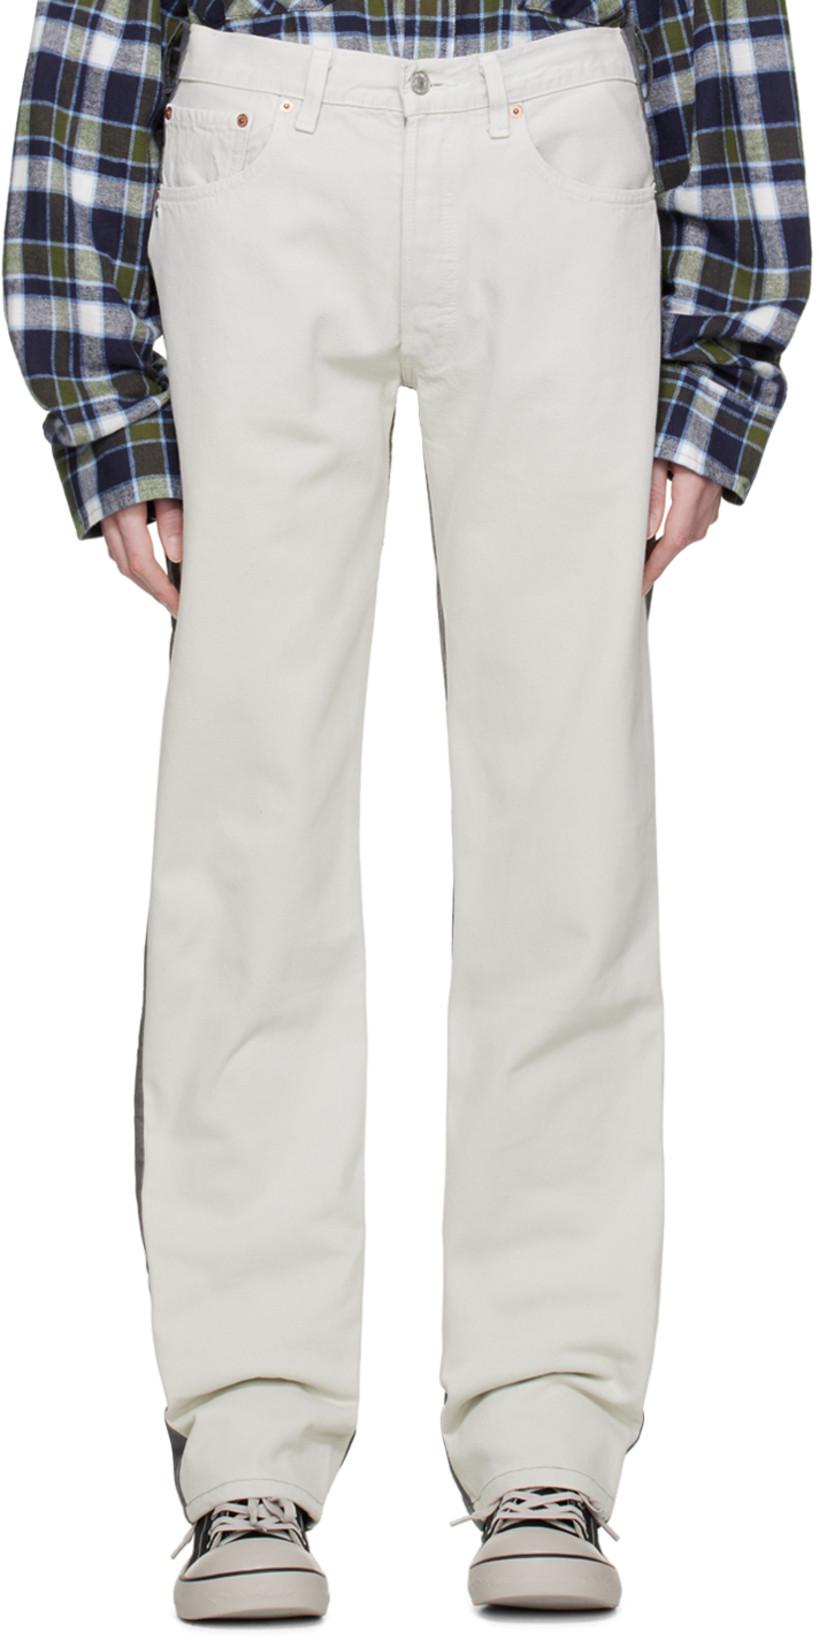 SSENSE Exclusive Beige & Gray Jeans by BLESS